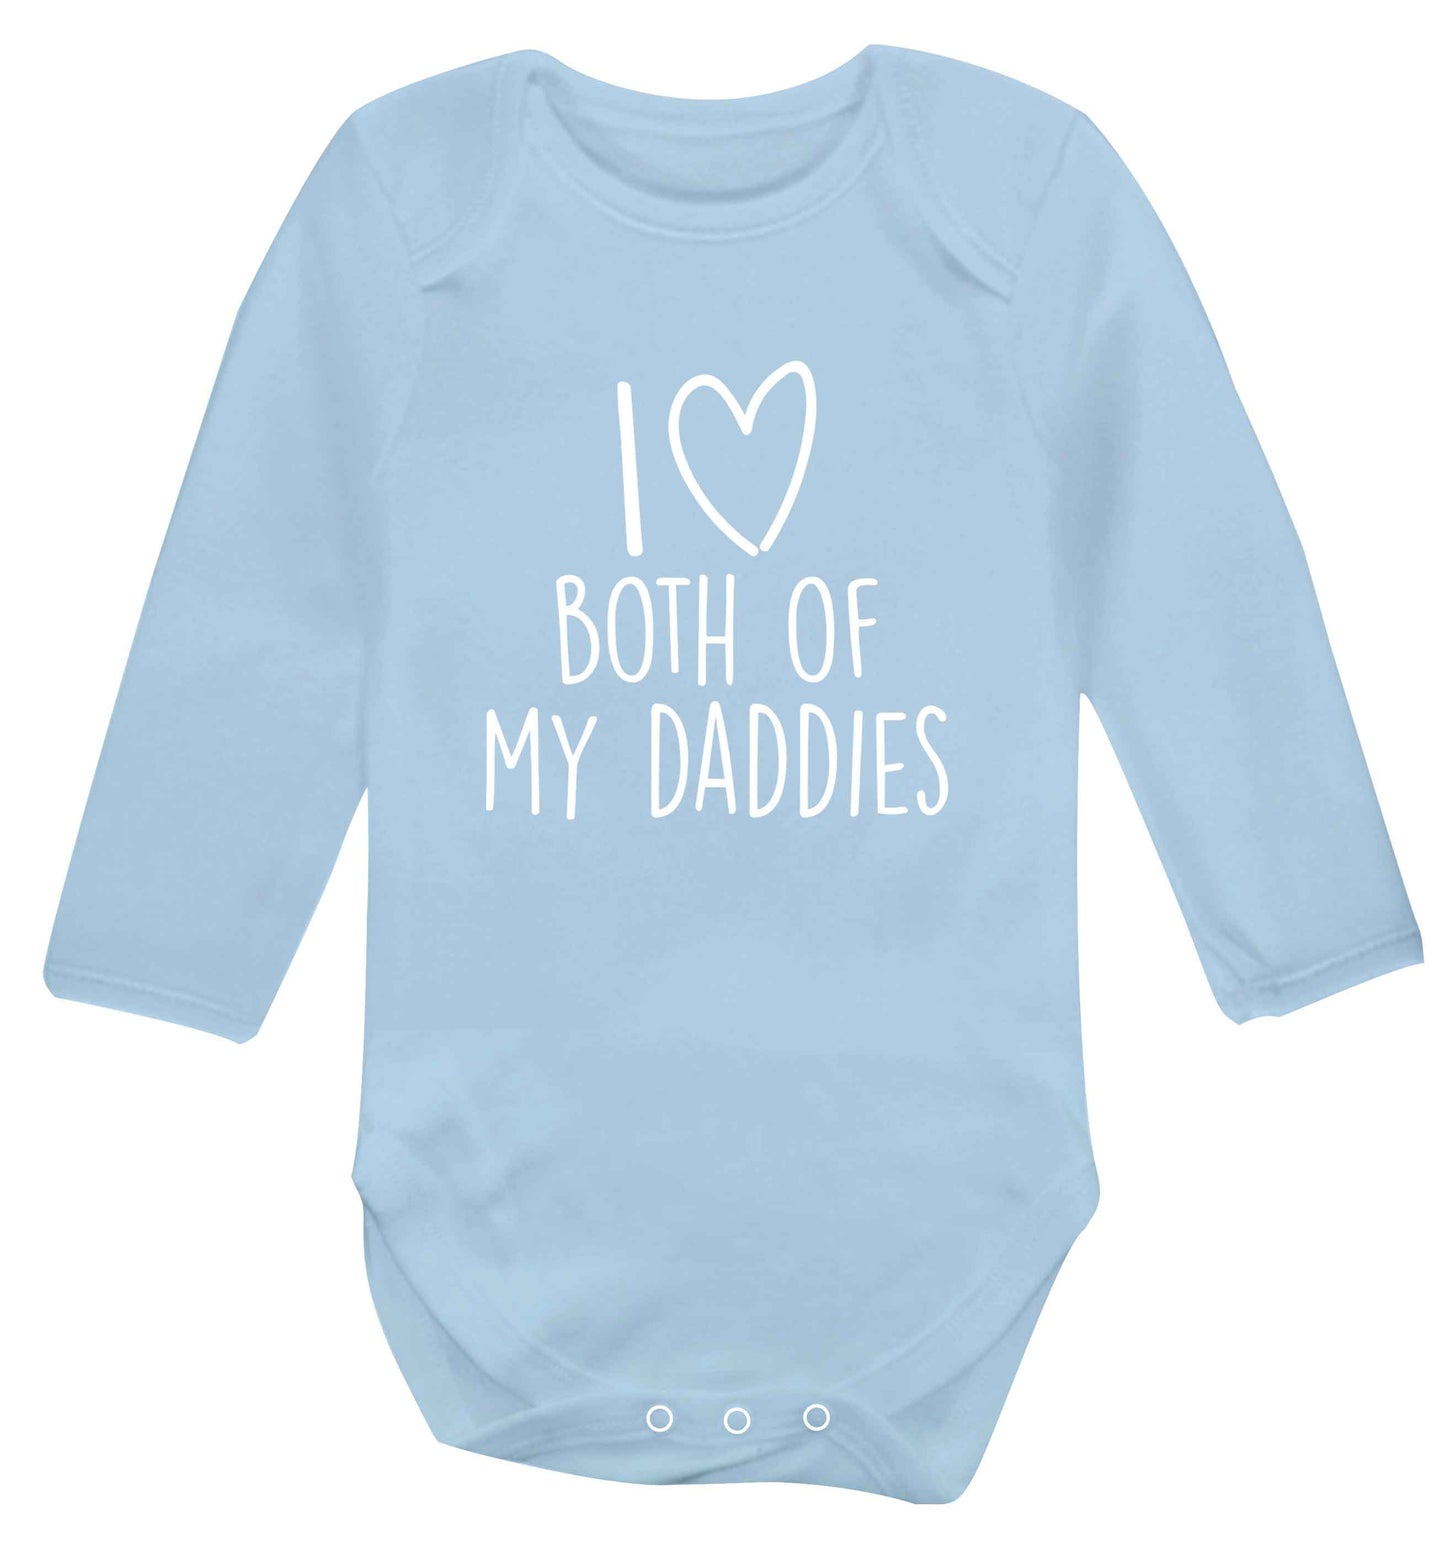 I love both of my daddies baby vest long sleeved pale blue 6-12 months